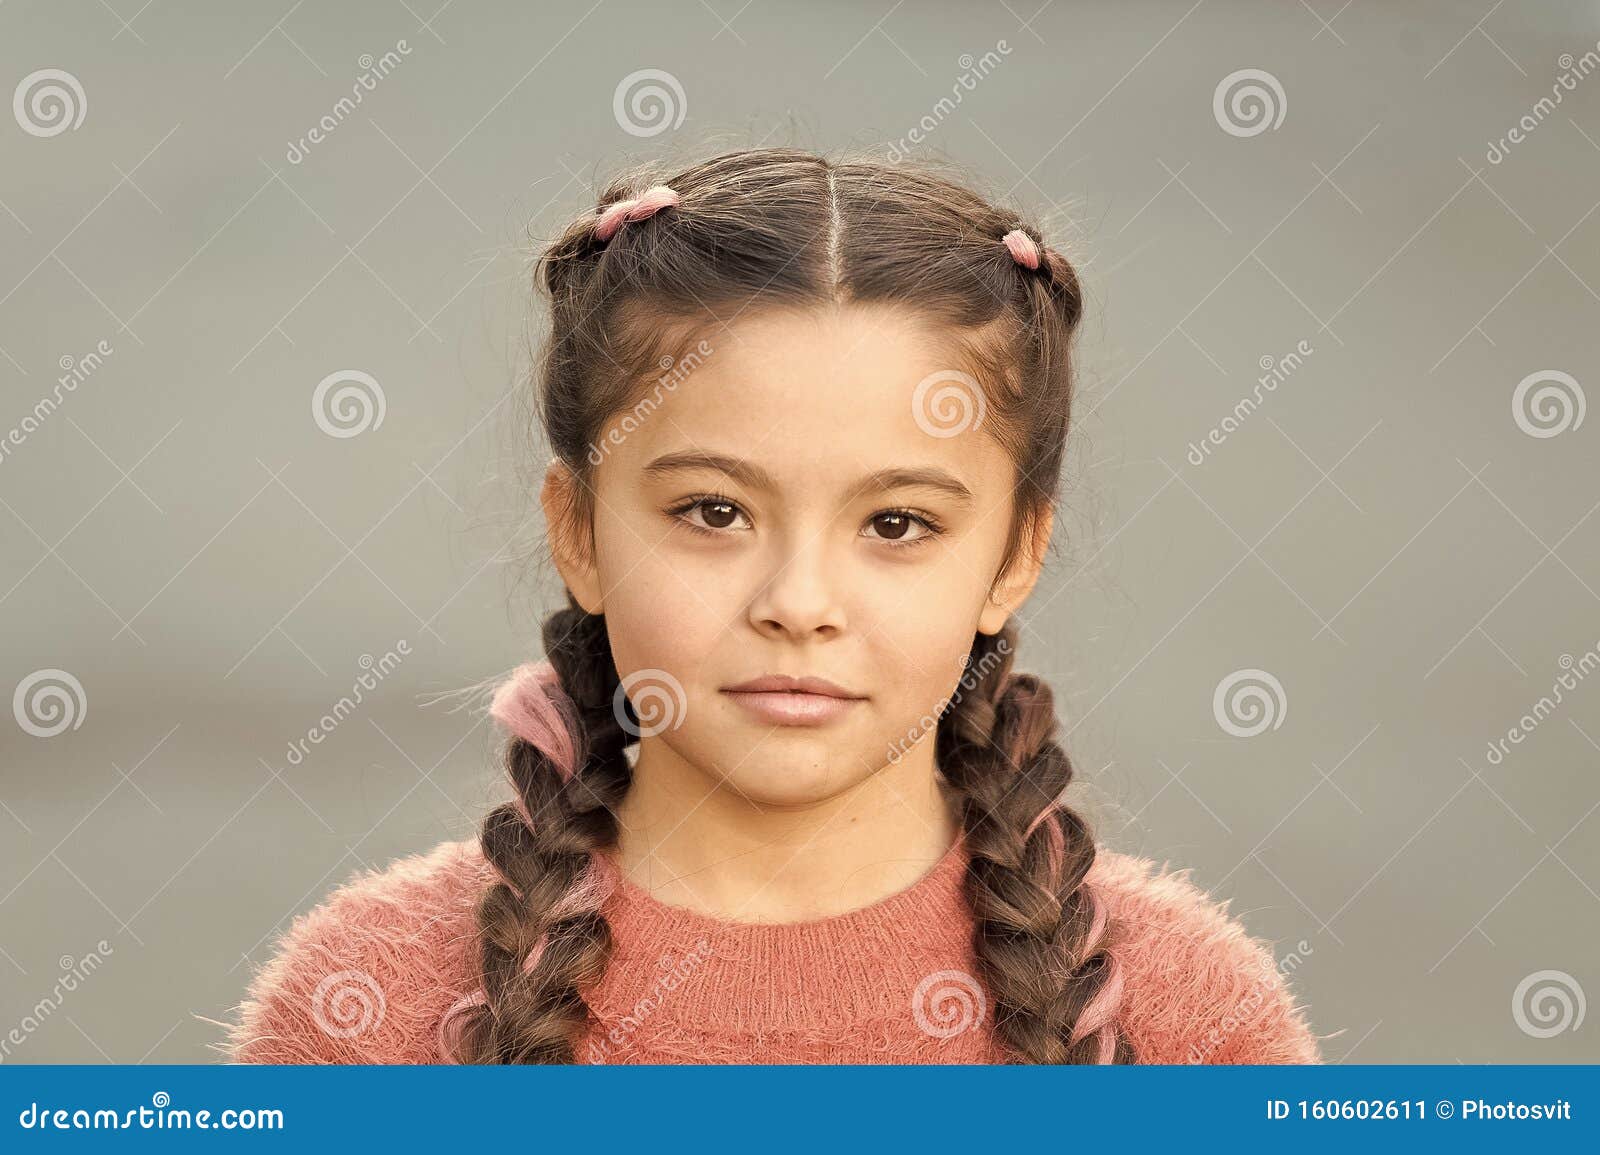 Beautiful Hairstyle Fashionable Hairstyle For Kids Small Girl With Fashionable Braids Hairstyle Fashion Trend Salon Stock Image Image Of Conditioner Fashion 160602611